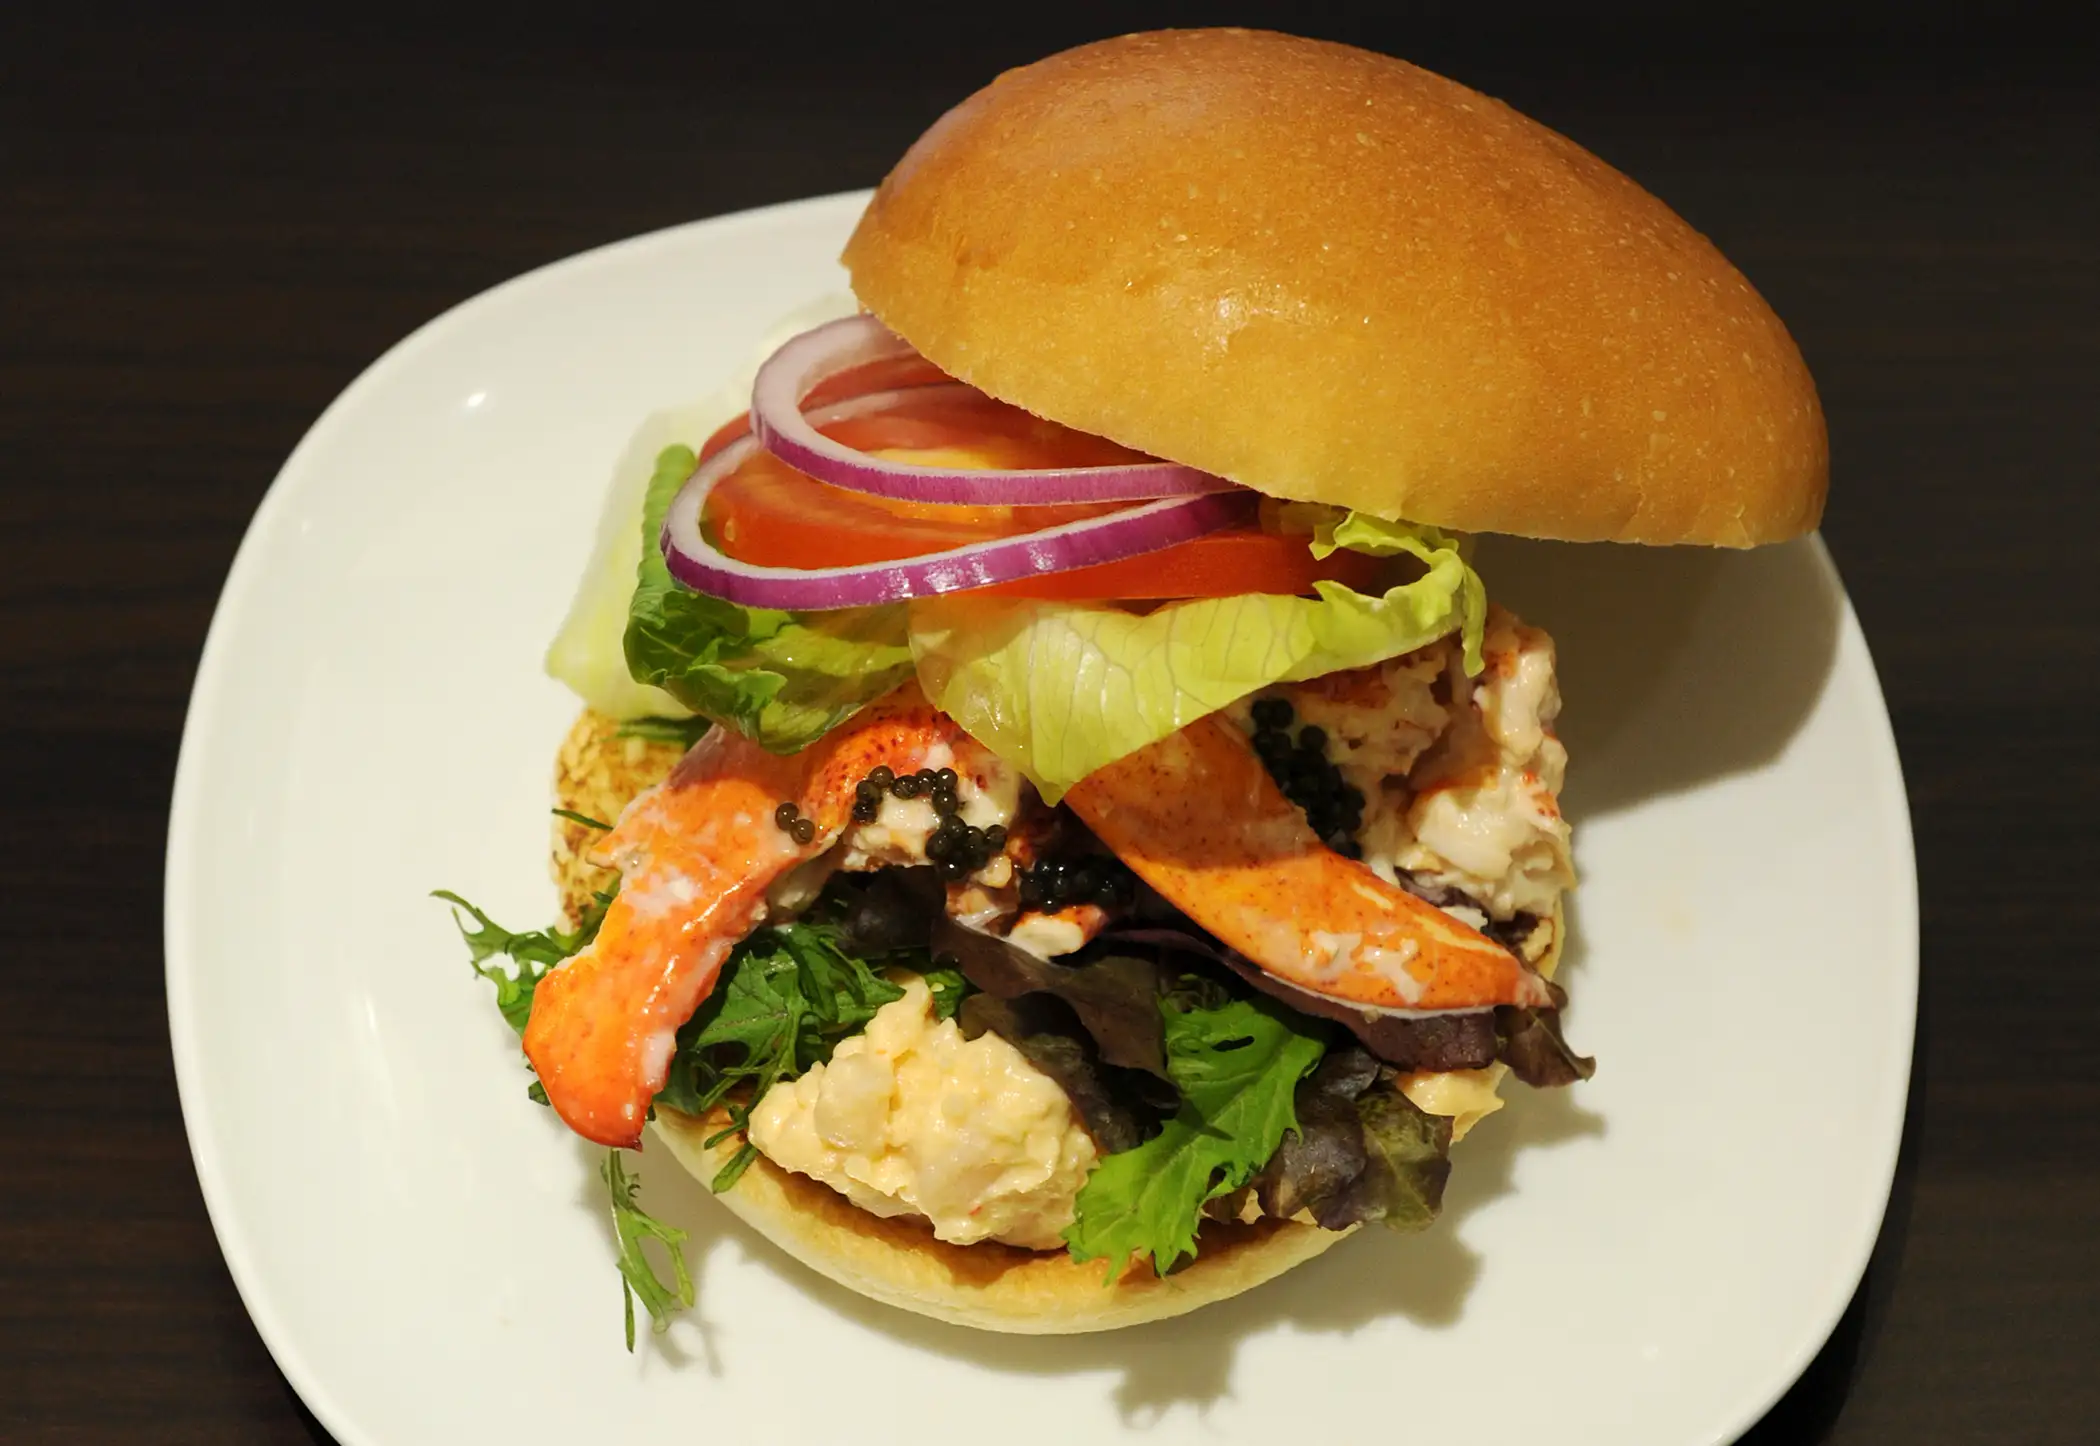 This picture shows the Lobster and Caviar burger featuring Canadian lobster and contains whole lobster pieces as well as a lobster salad made with a mustard mayonnaise as well as a sprinkle of caviar produced by Wendy's Japan as part of the campany's opening of their second restaurant in Roppongi, Tokyo on August 17, 2012. Wendy's Japan introduced two new burgers to their Japan Premium line of burgers which features fancy ingredients.